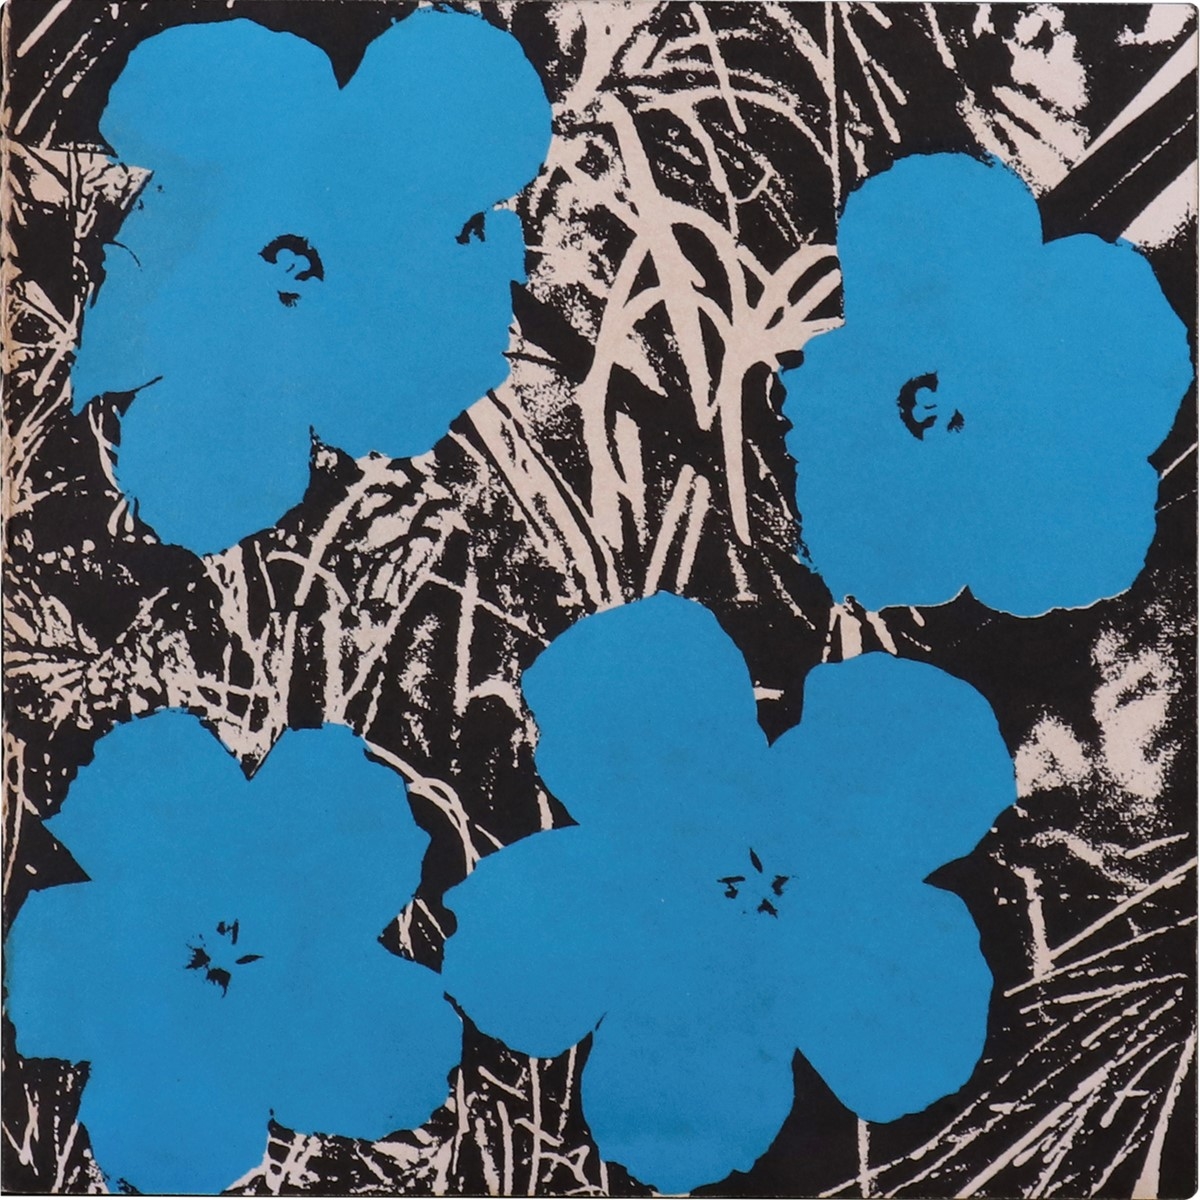 FLOWERS by Andy Warhol, 1965